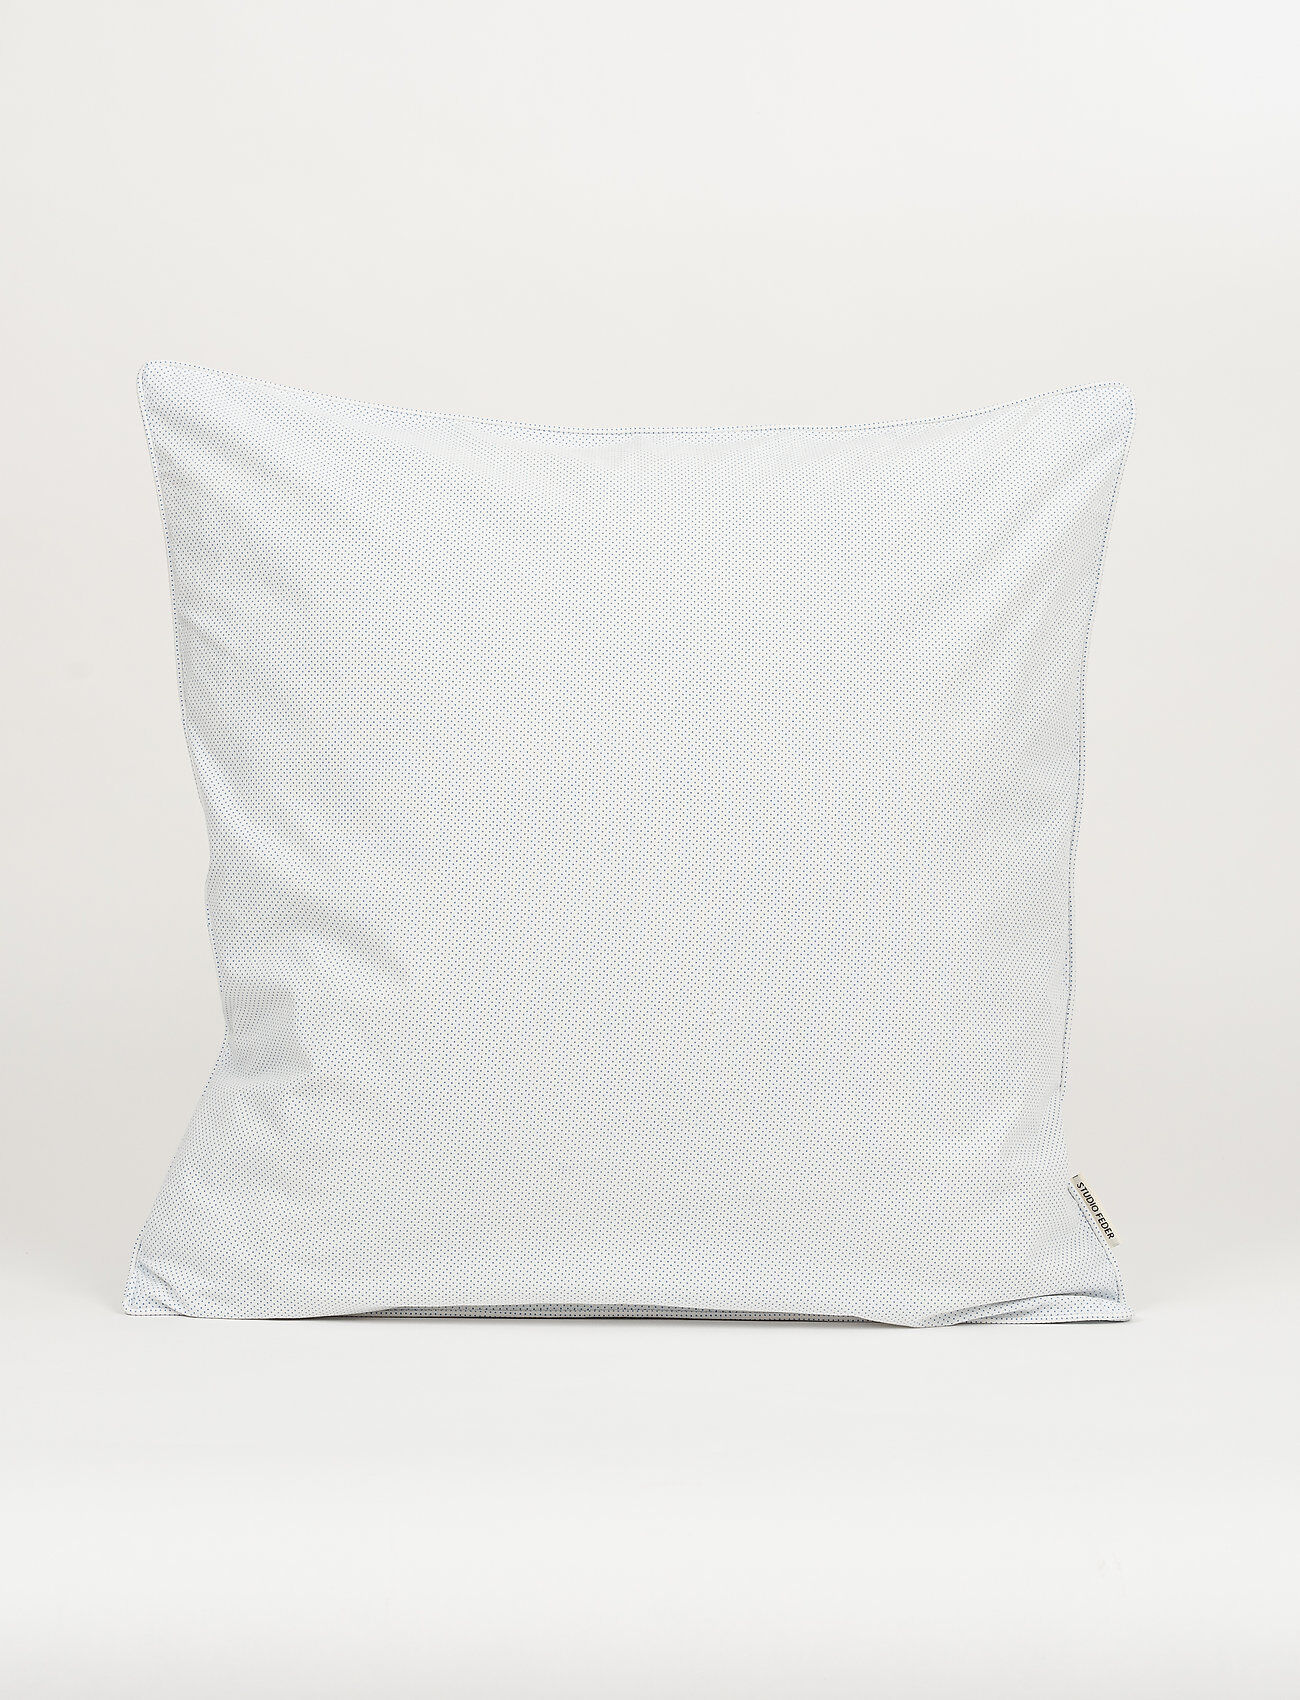 STUDIO FEDER Cushion Piping - Small Ink Home Textiles Cushions & Blankets Cushions Blå STUDIO FEDER